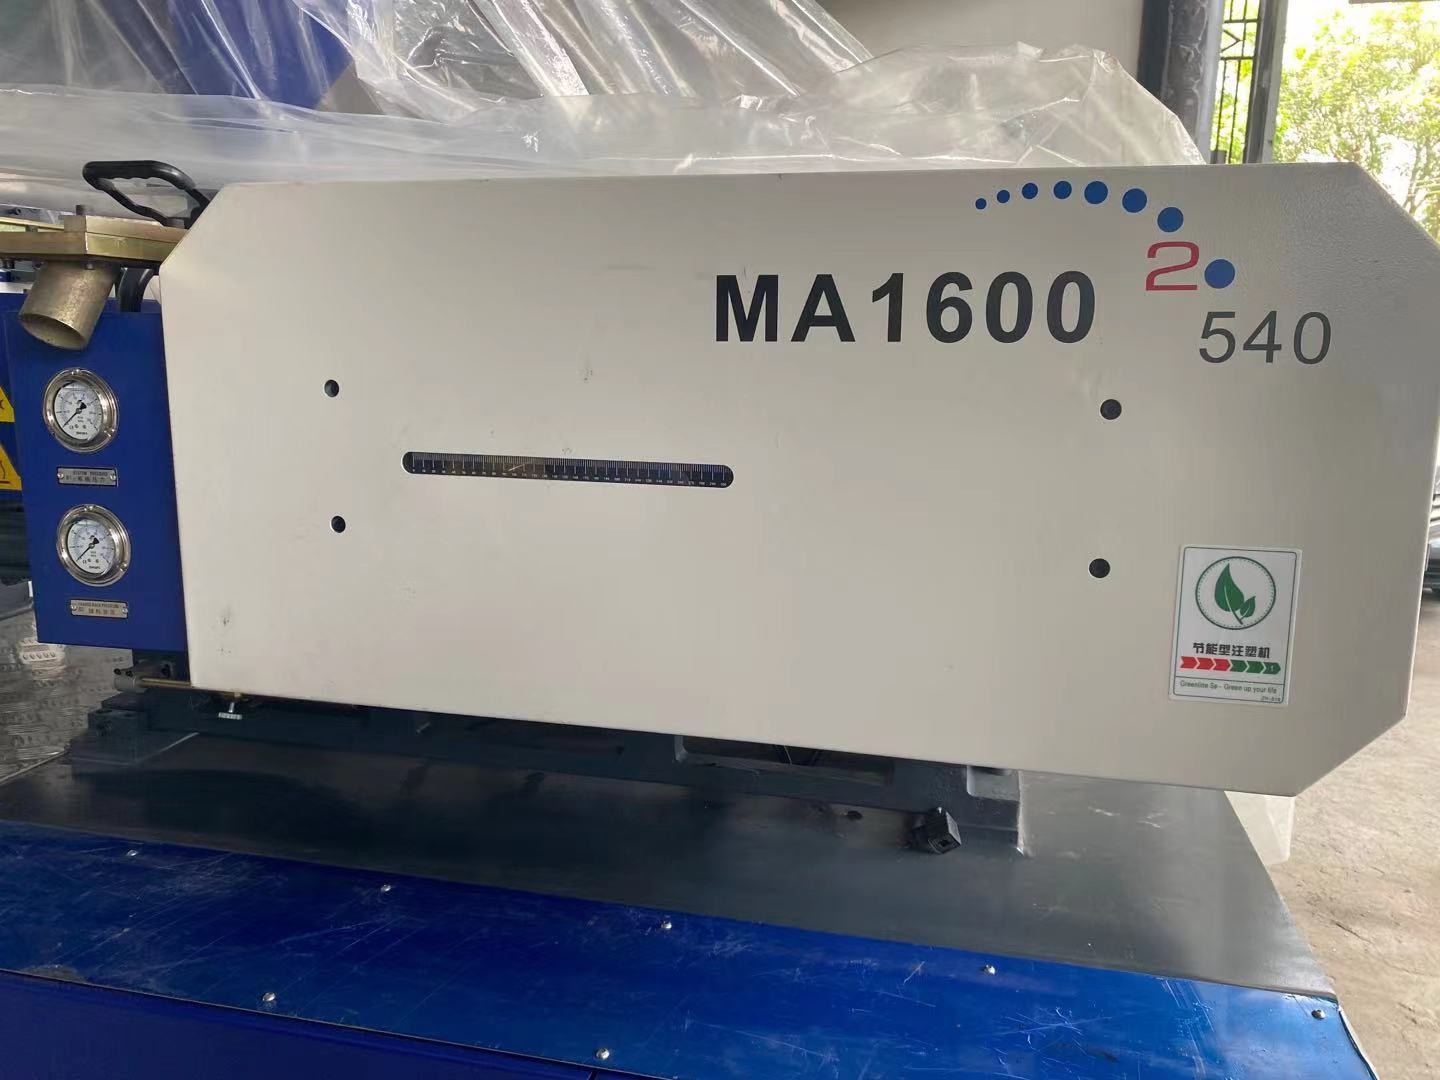  Haisong MA1600 PET Preform Making Machine Small 160 Ton Injection Moulding Machine Manufactures